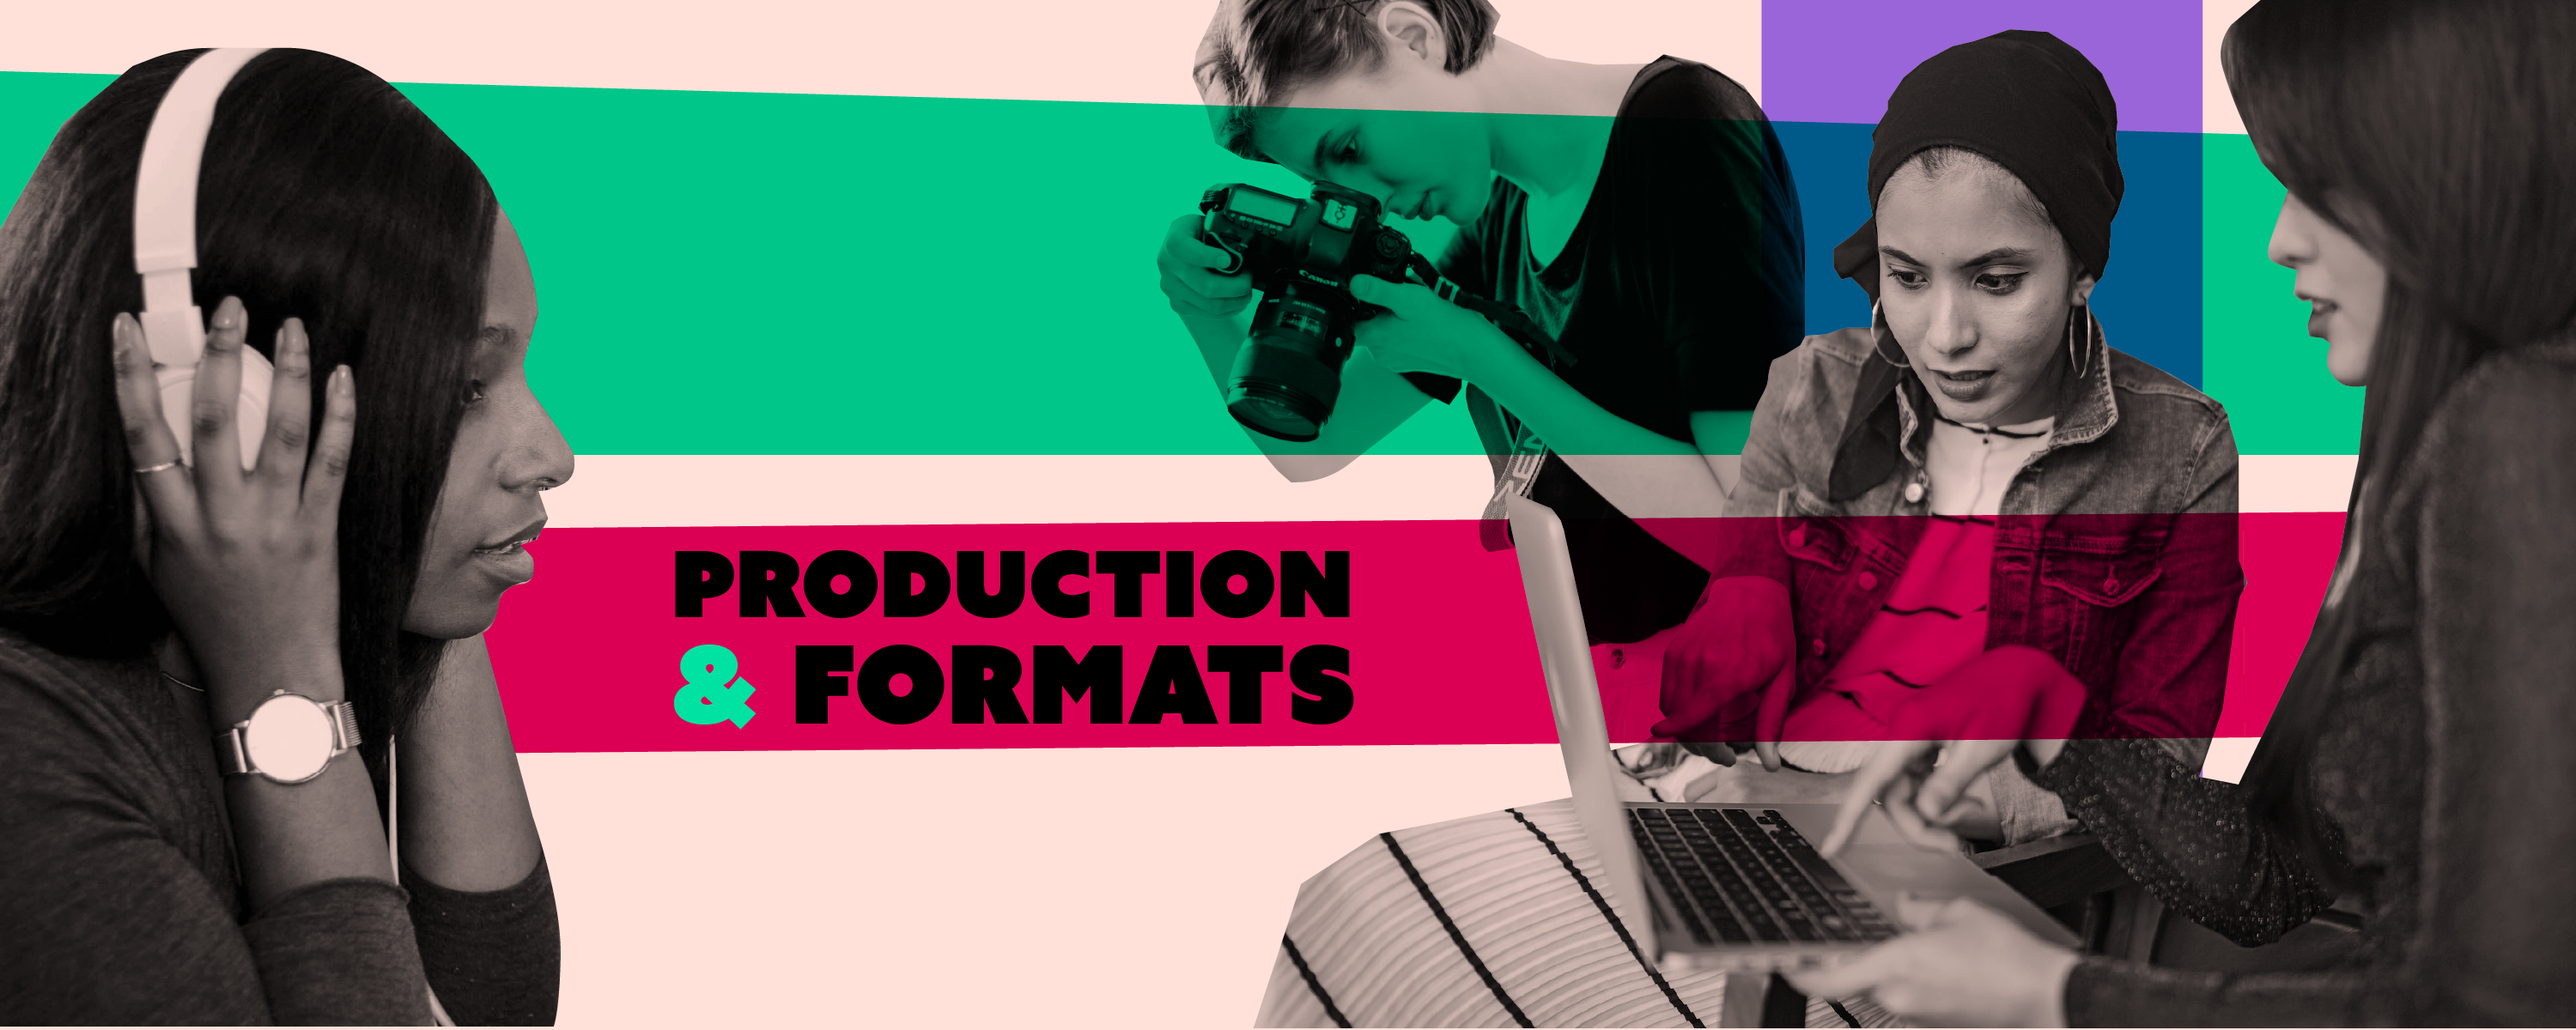 Production and formats